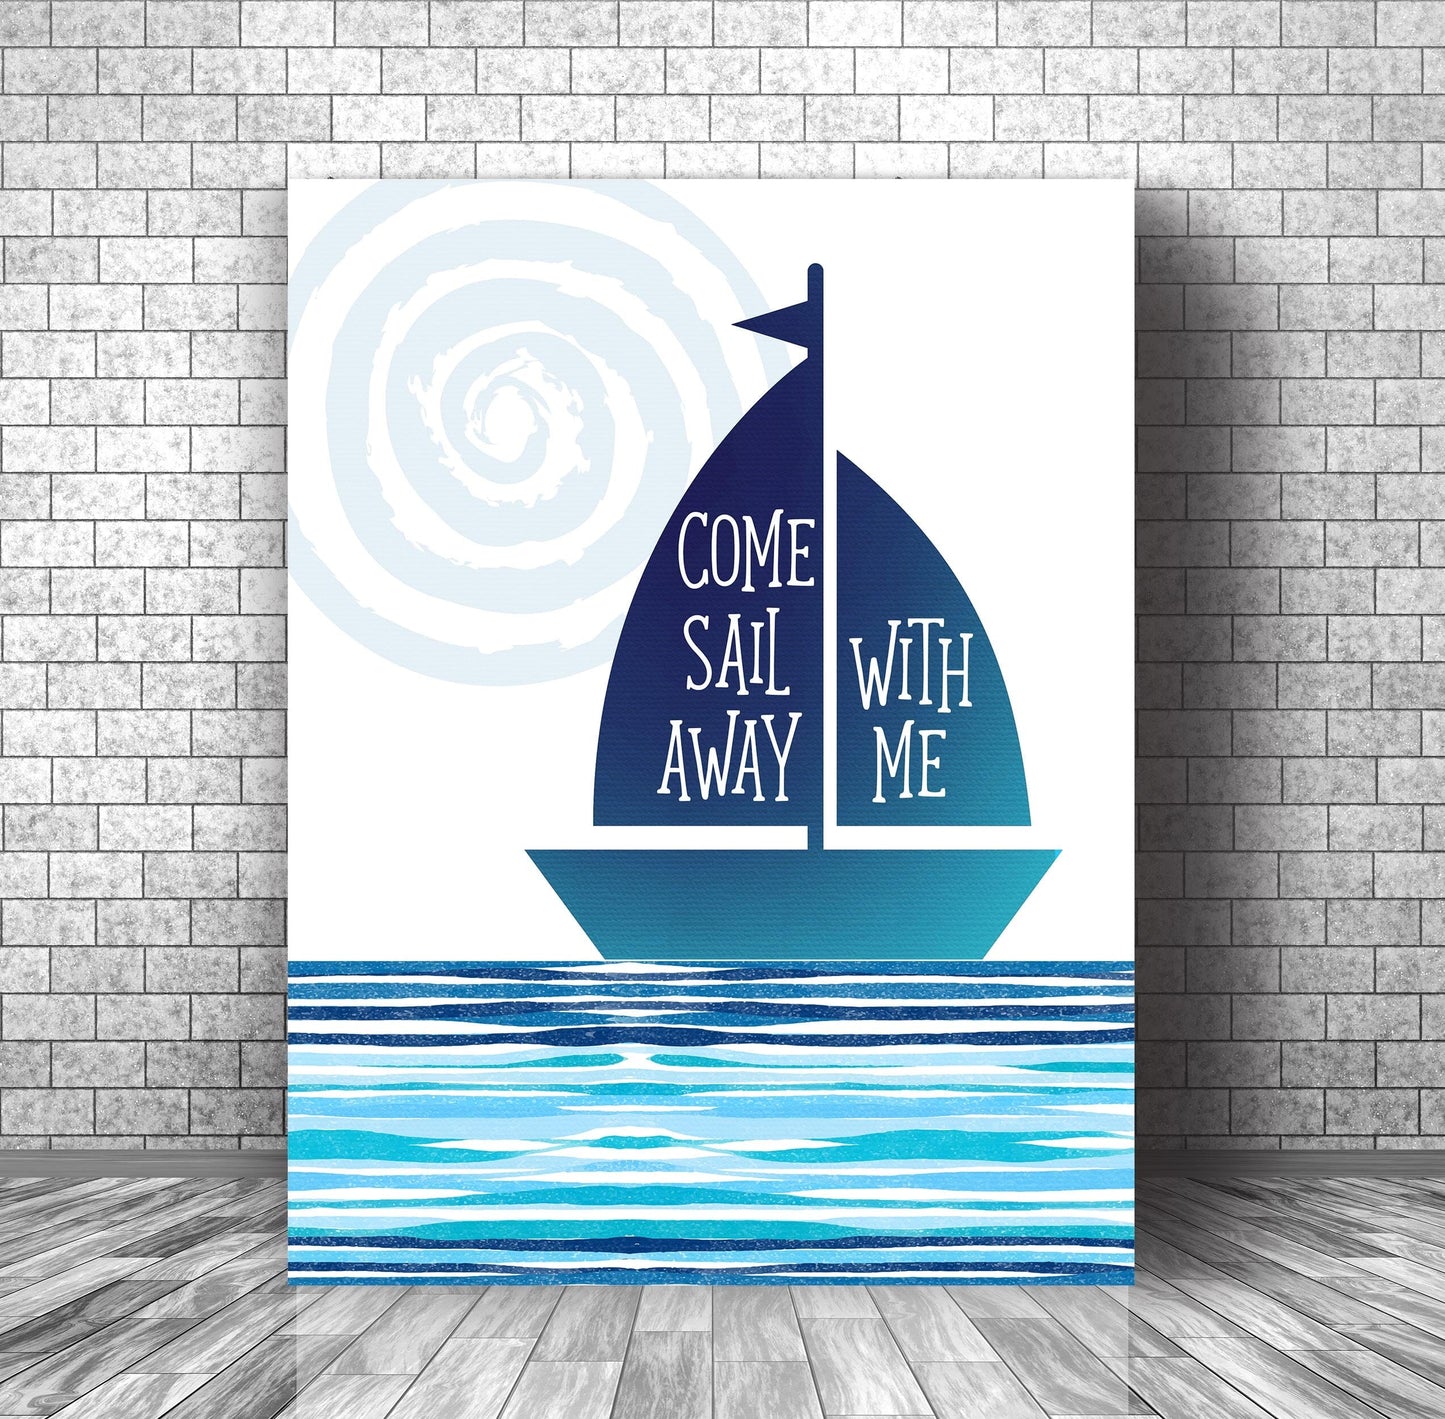 Come Sail Away by Styx - Classic 70s Music Song Lyric Art Song Lyrics Art Song Lyrics Art 11x14 Canvas Wrap 